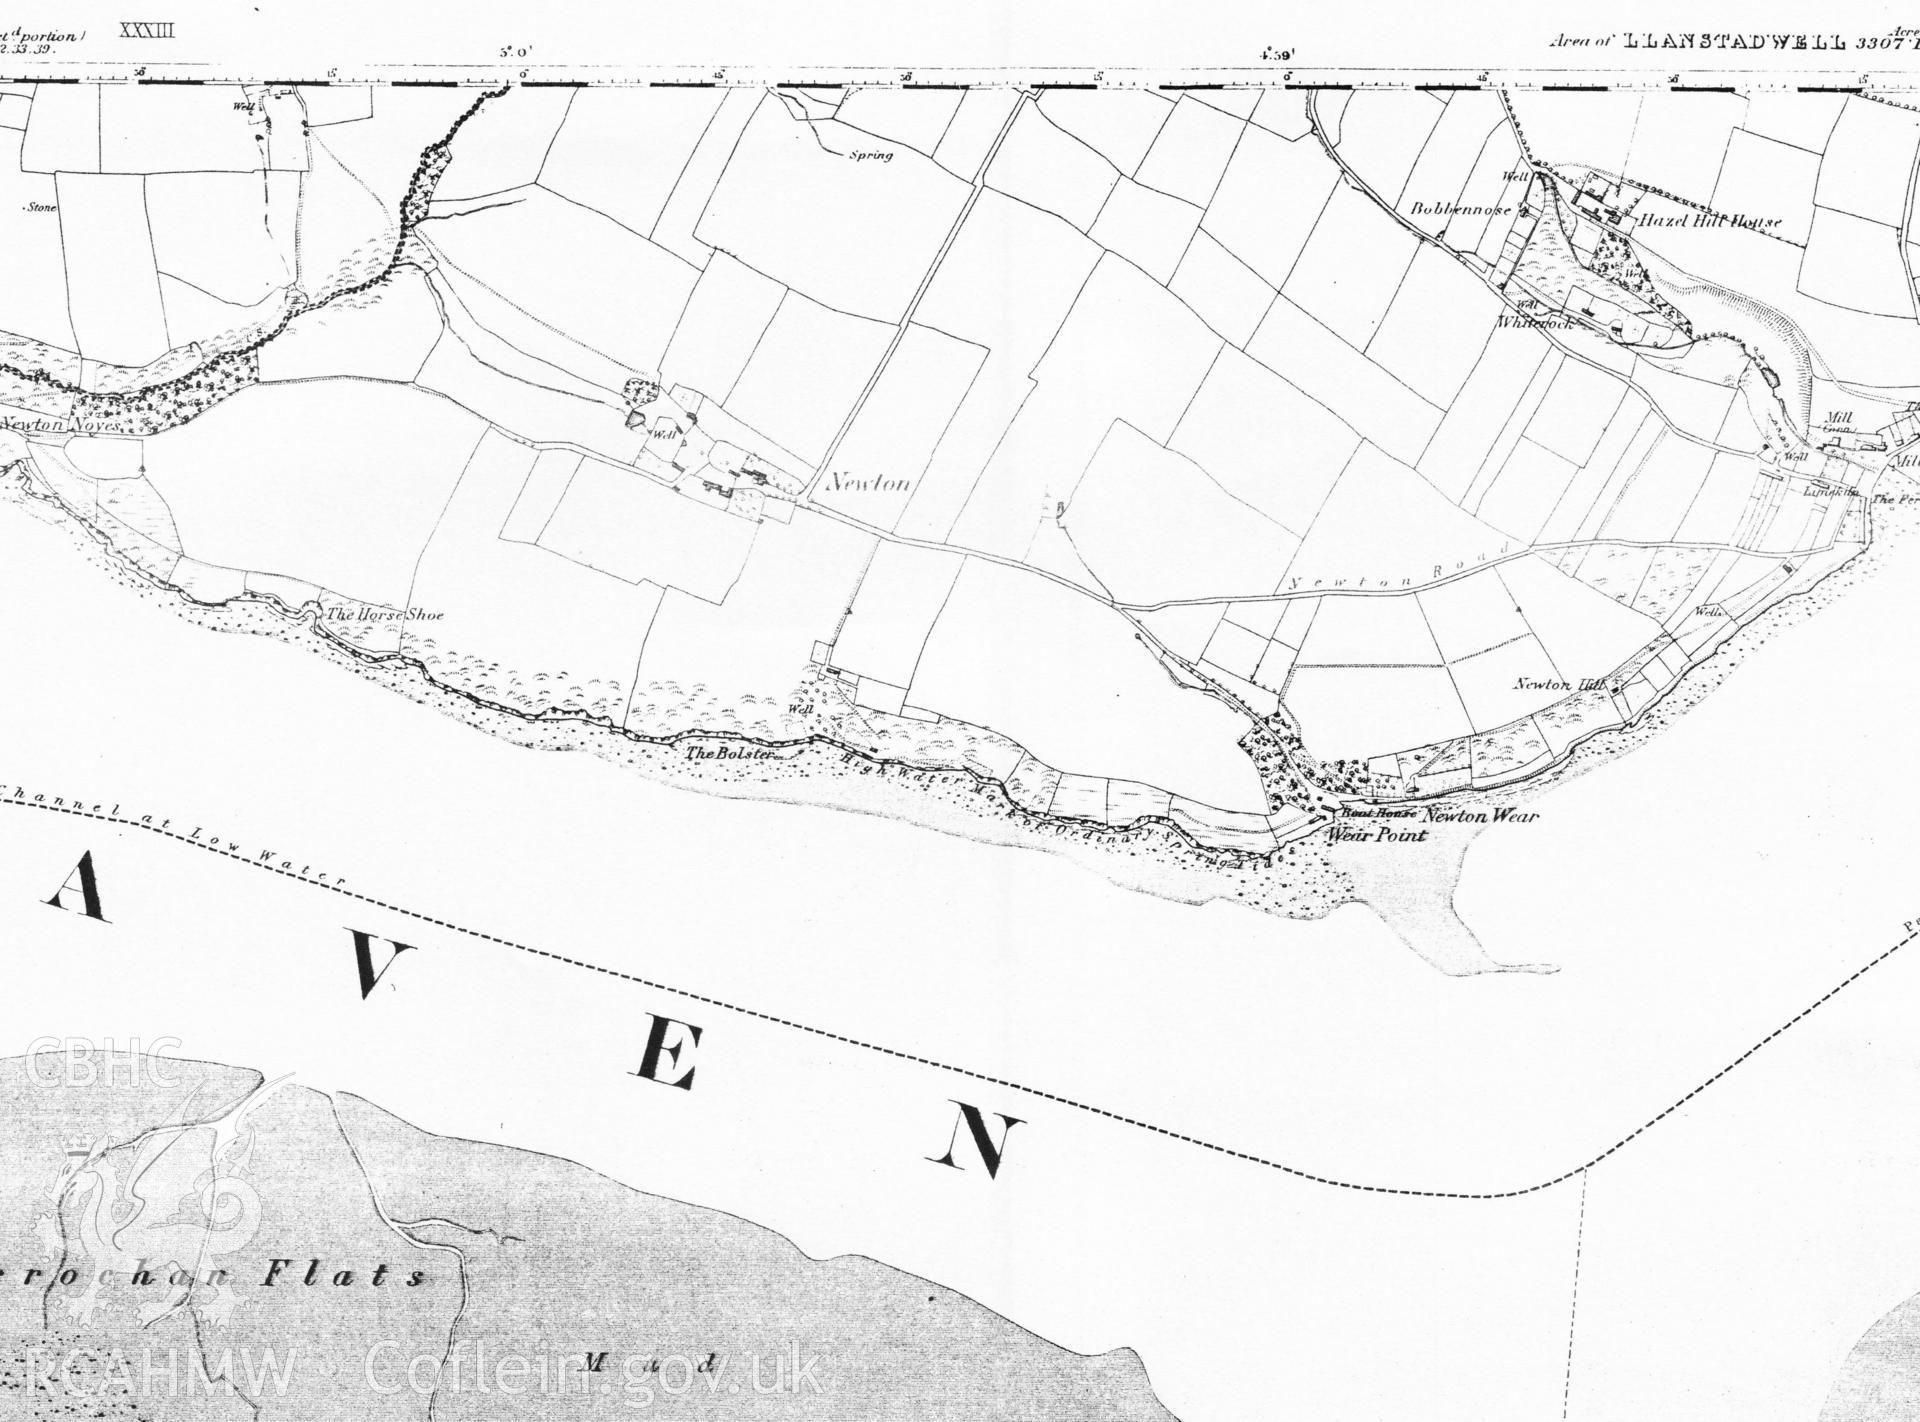 Digital copy of a first edition OS map, showing the assessment area.